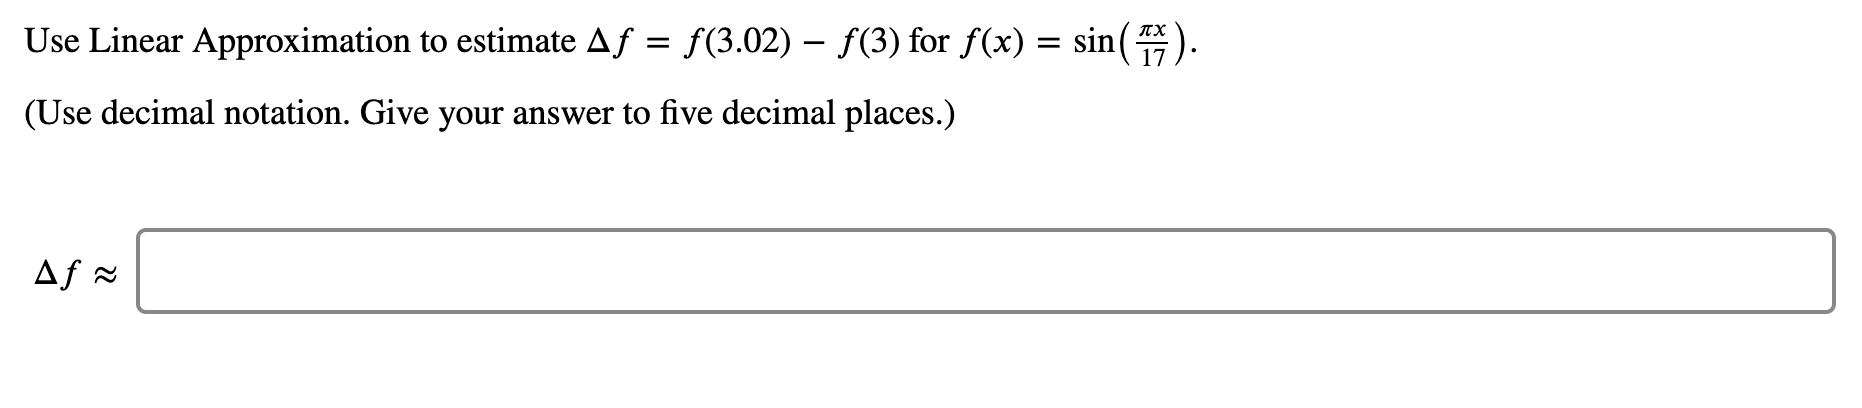 Use Linear Approximation to estimate Af = f(3.02) – f(3) for f(x) = sin().
(Use decimal notation. Give your answer to five decimal places.)
Af =
